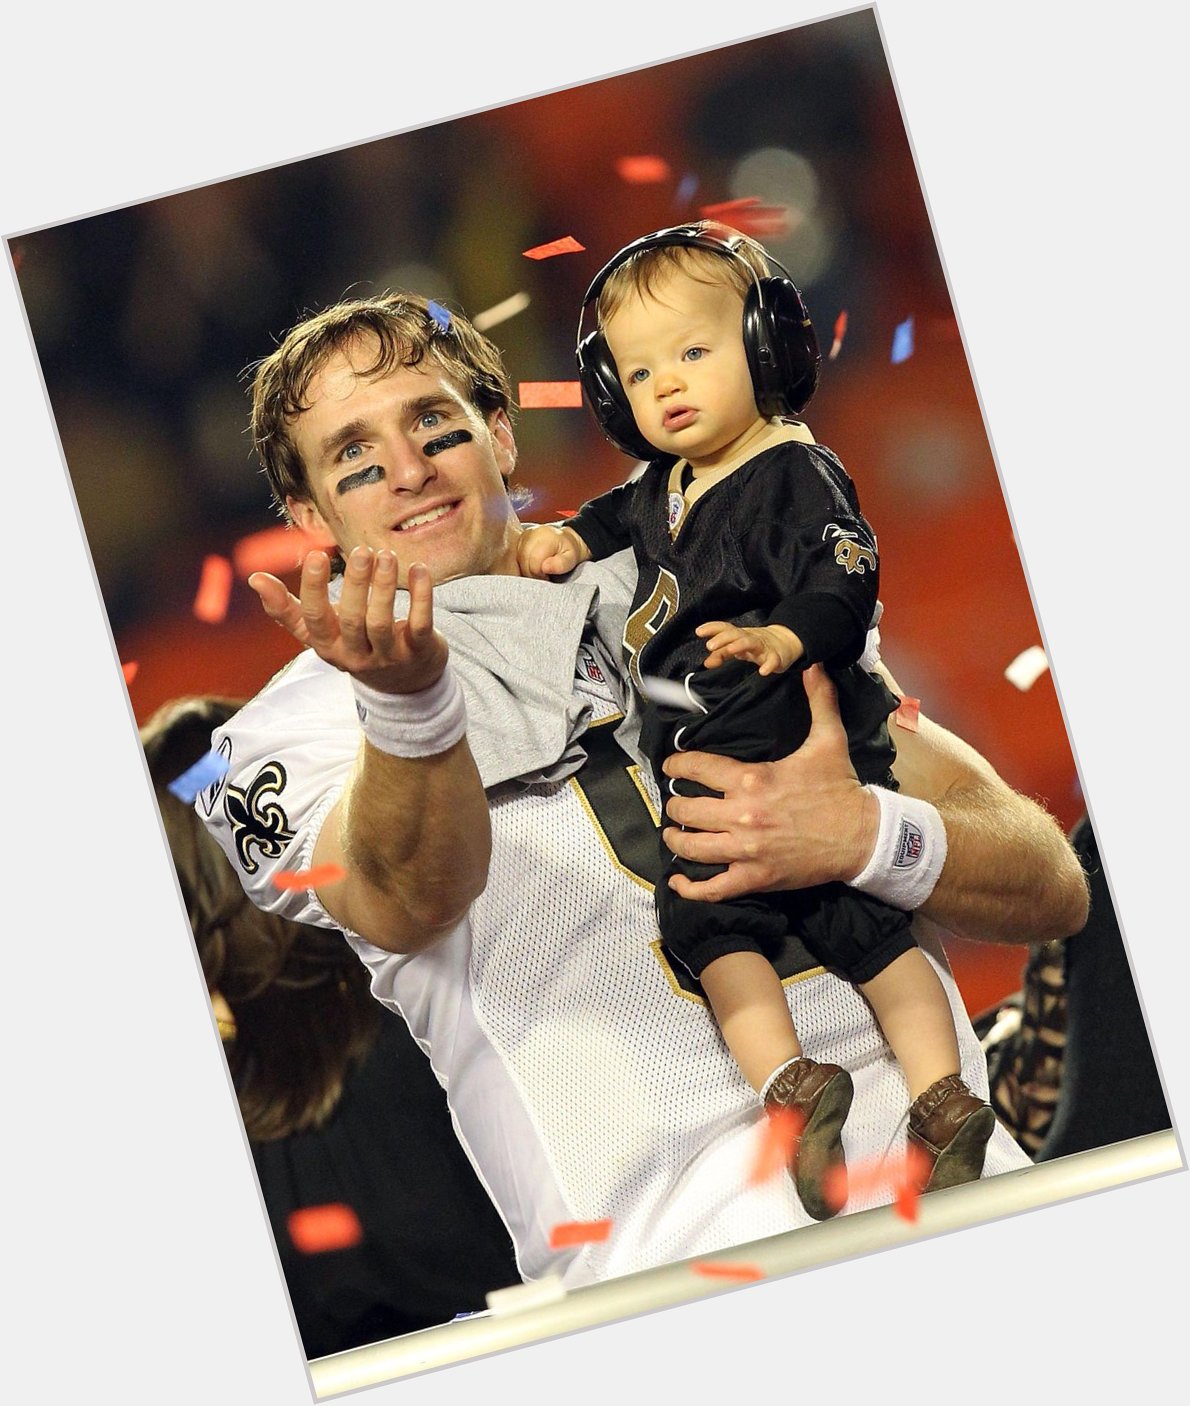 Happy 36th birthday to Saints QB  Drew Brees and his son Baylen too! 